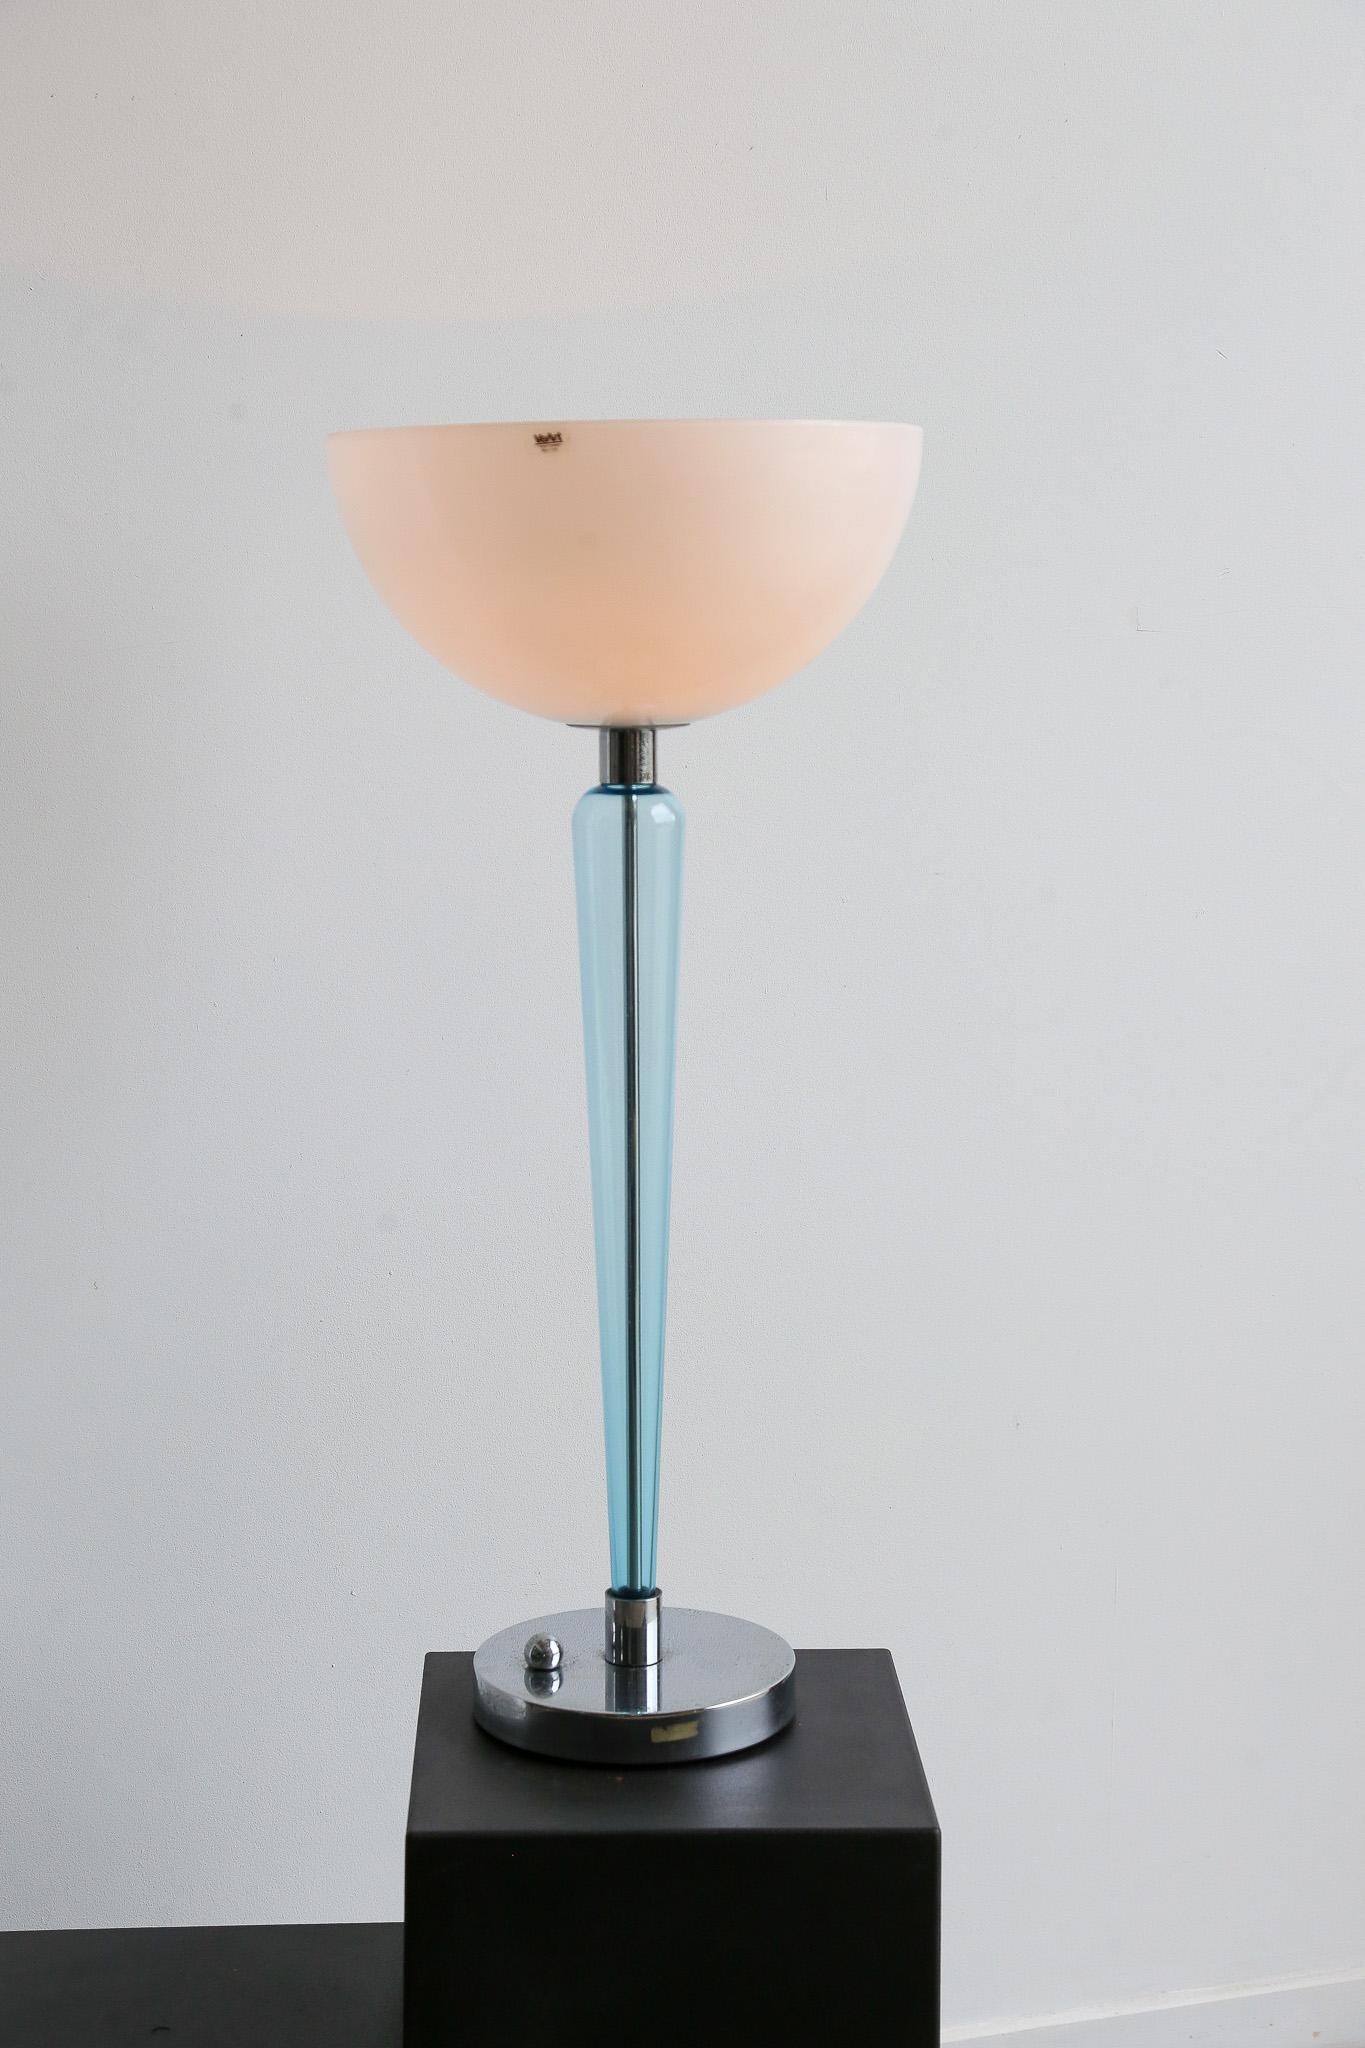 Designed by Jeannot Cerutti and produced by Ve-Art, Coppa is a magnificent table lamp with a vintage and elegant design, perfect for furniture lovers with a retro touch. The lamp is composed of two parts in blown Murano glass, light blue and white